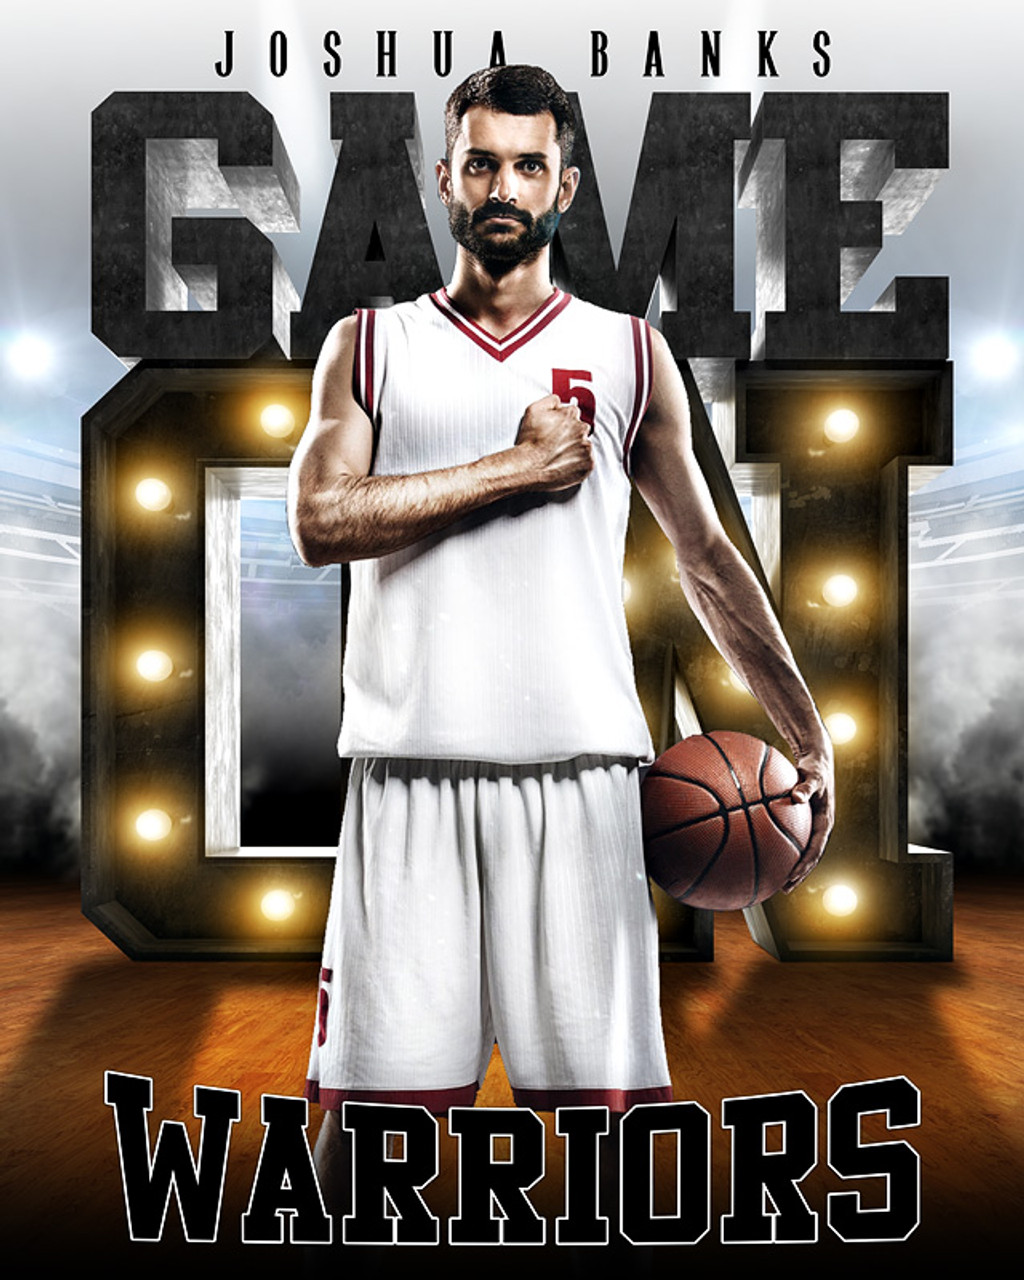 16x20 MULTI-SPORT POSTER - GAME ON LIGHTS - CUSTOM PHOTOSHOP LAYERED SPORTS TEMPLATE